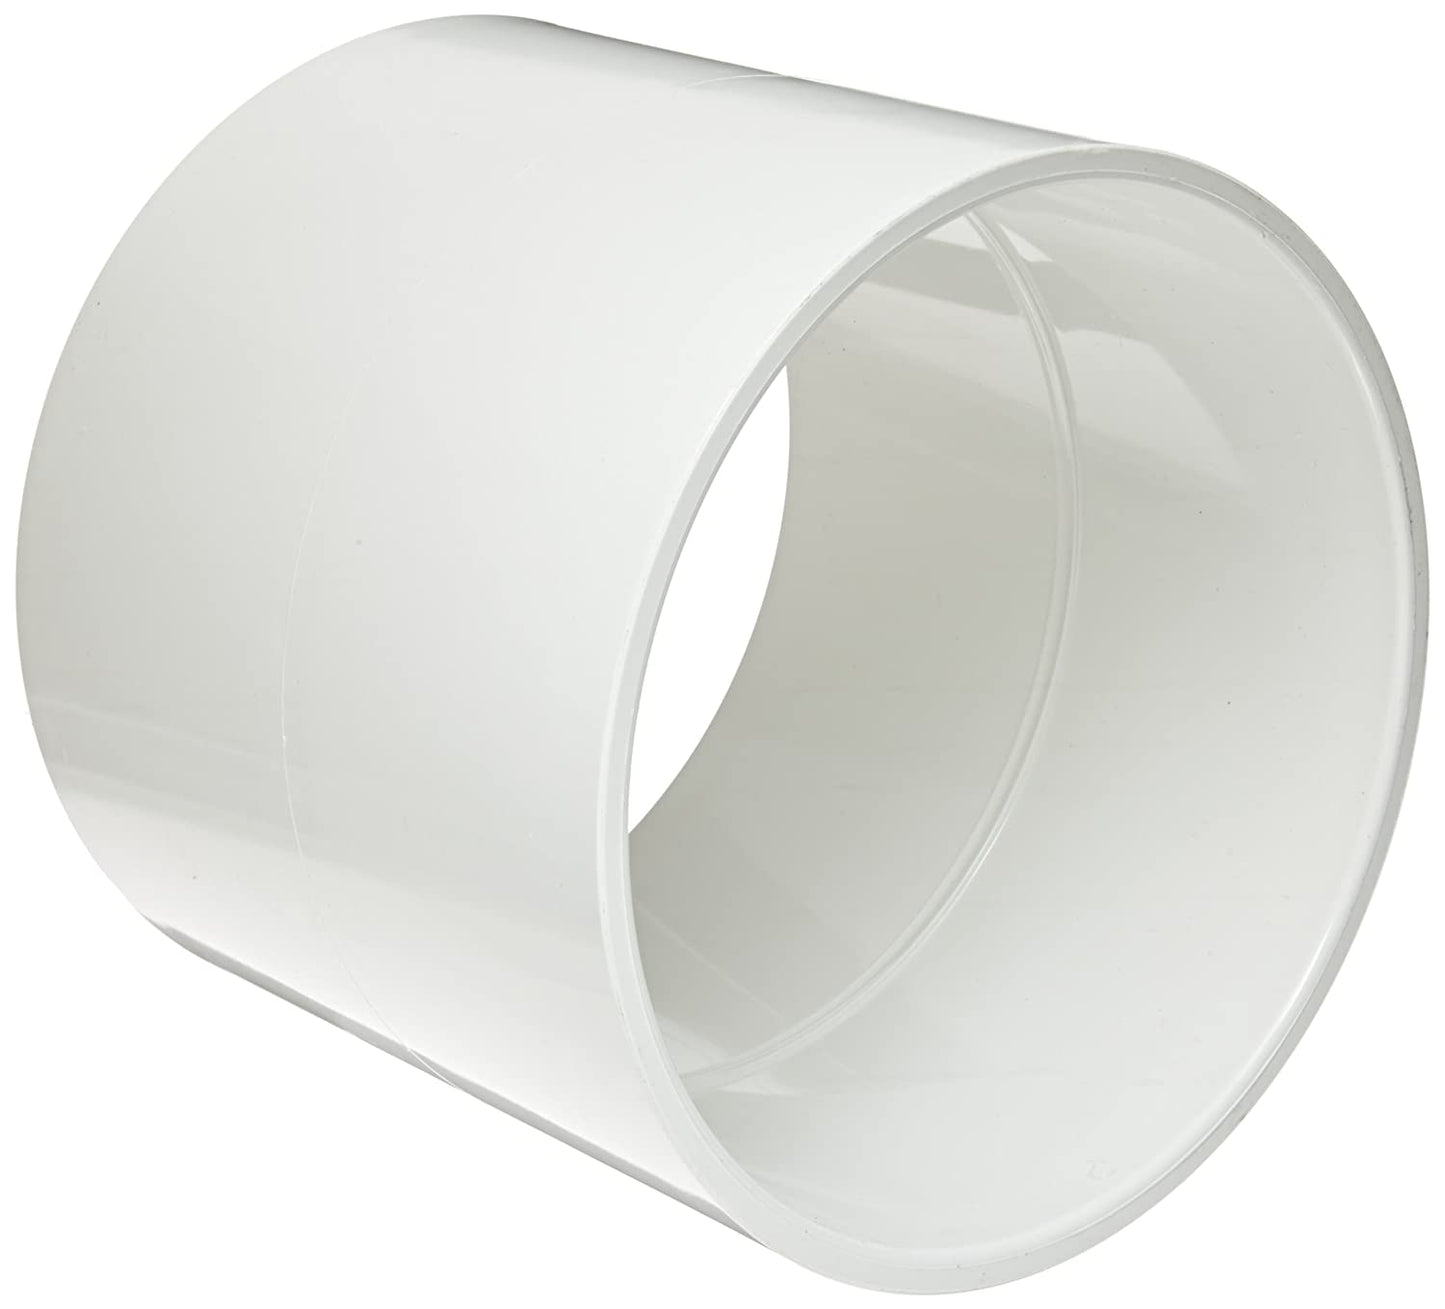 429-005 - 1/2" PVC Pipe Fitting, Coupling, Schedule 40, White Socket